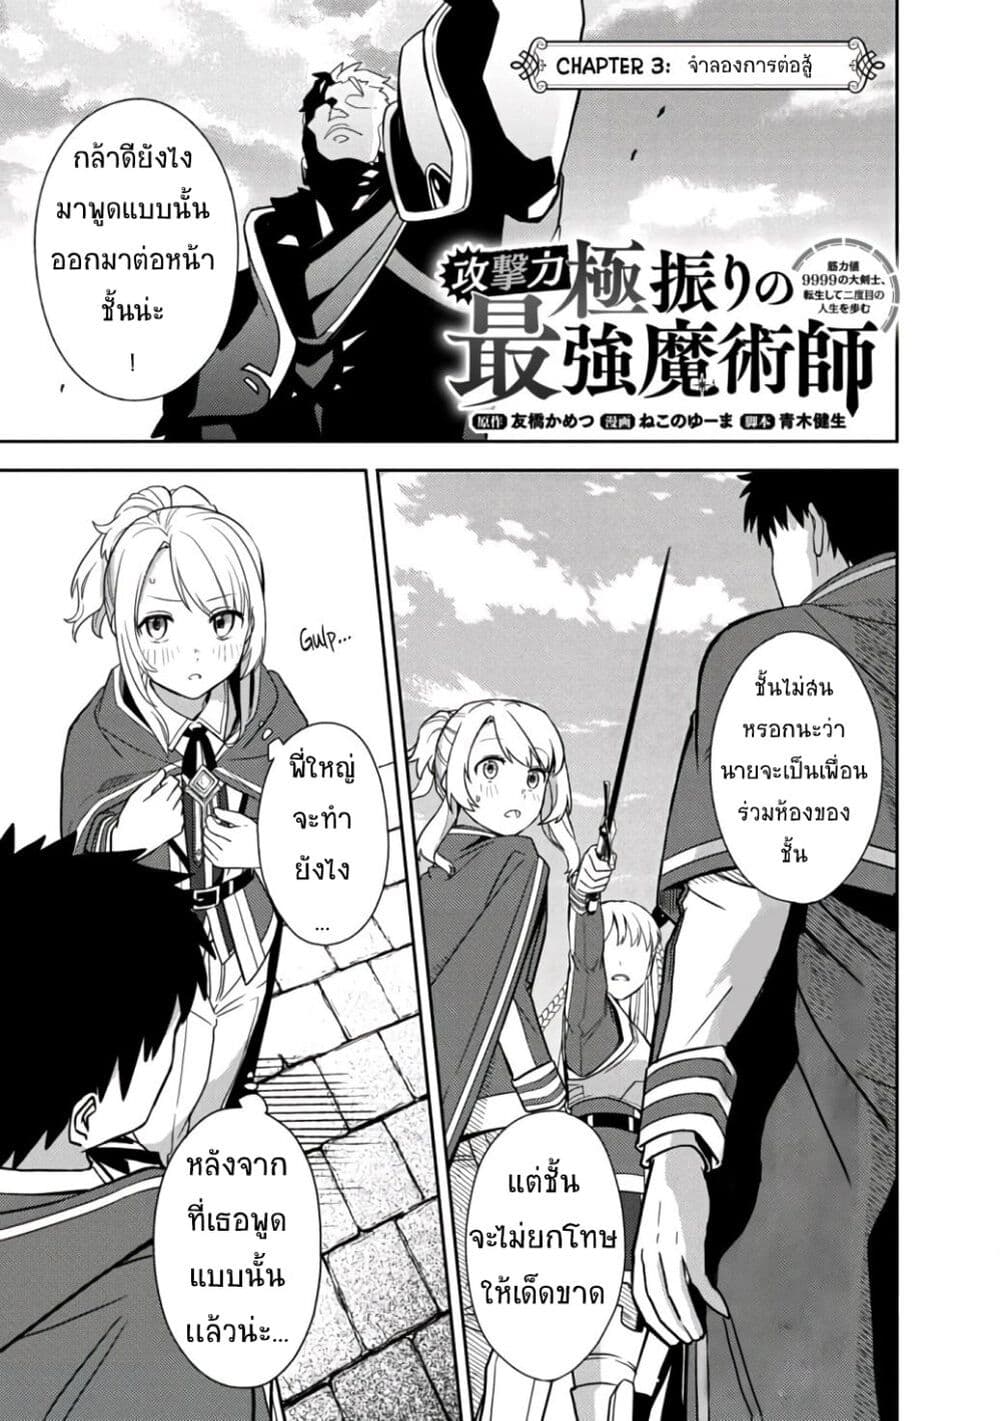 The Reincarnated Swordsman With 9999 Strength Wants to Become a Magician! ตอนที่ 3.1 (2)